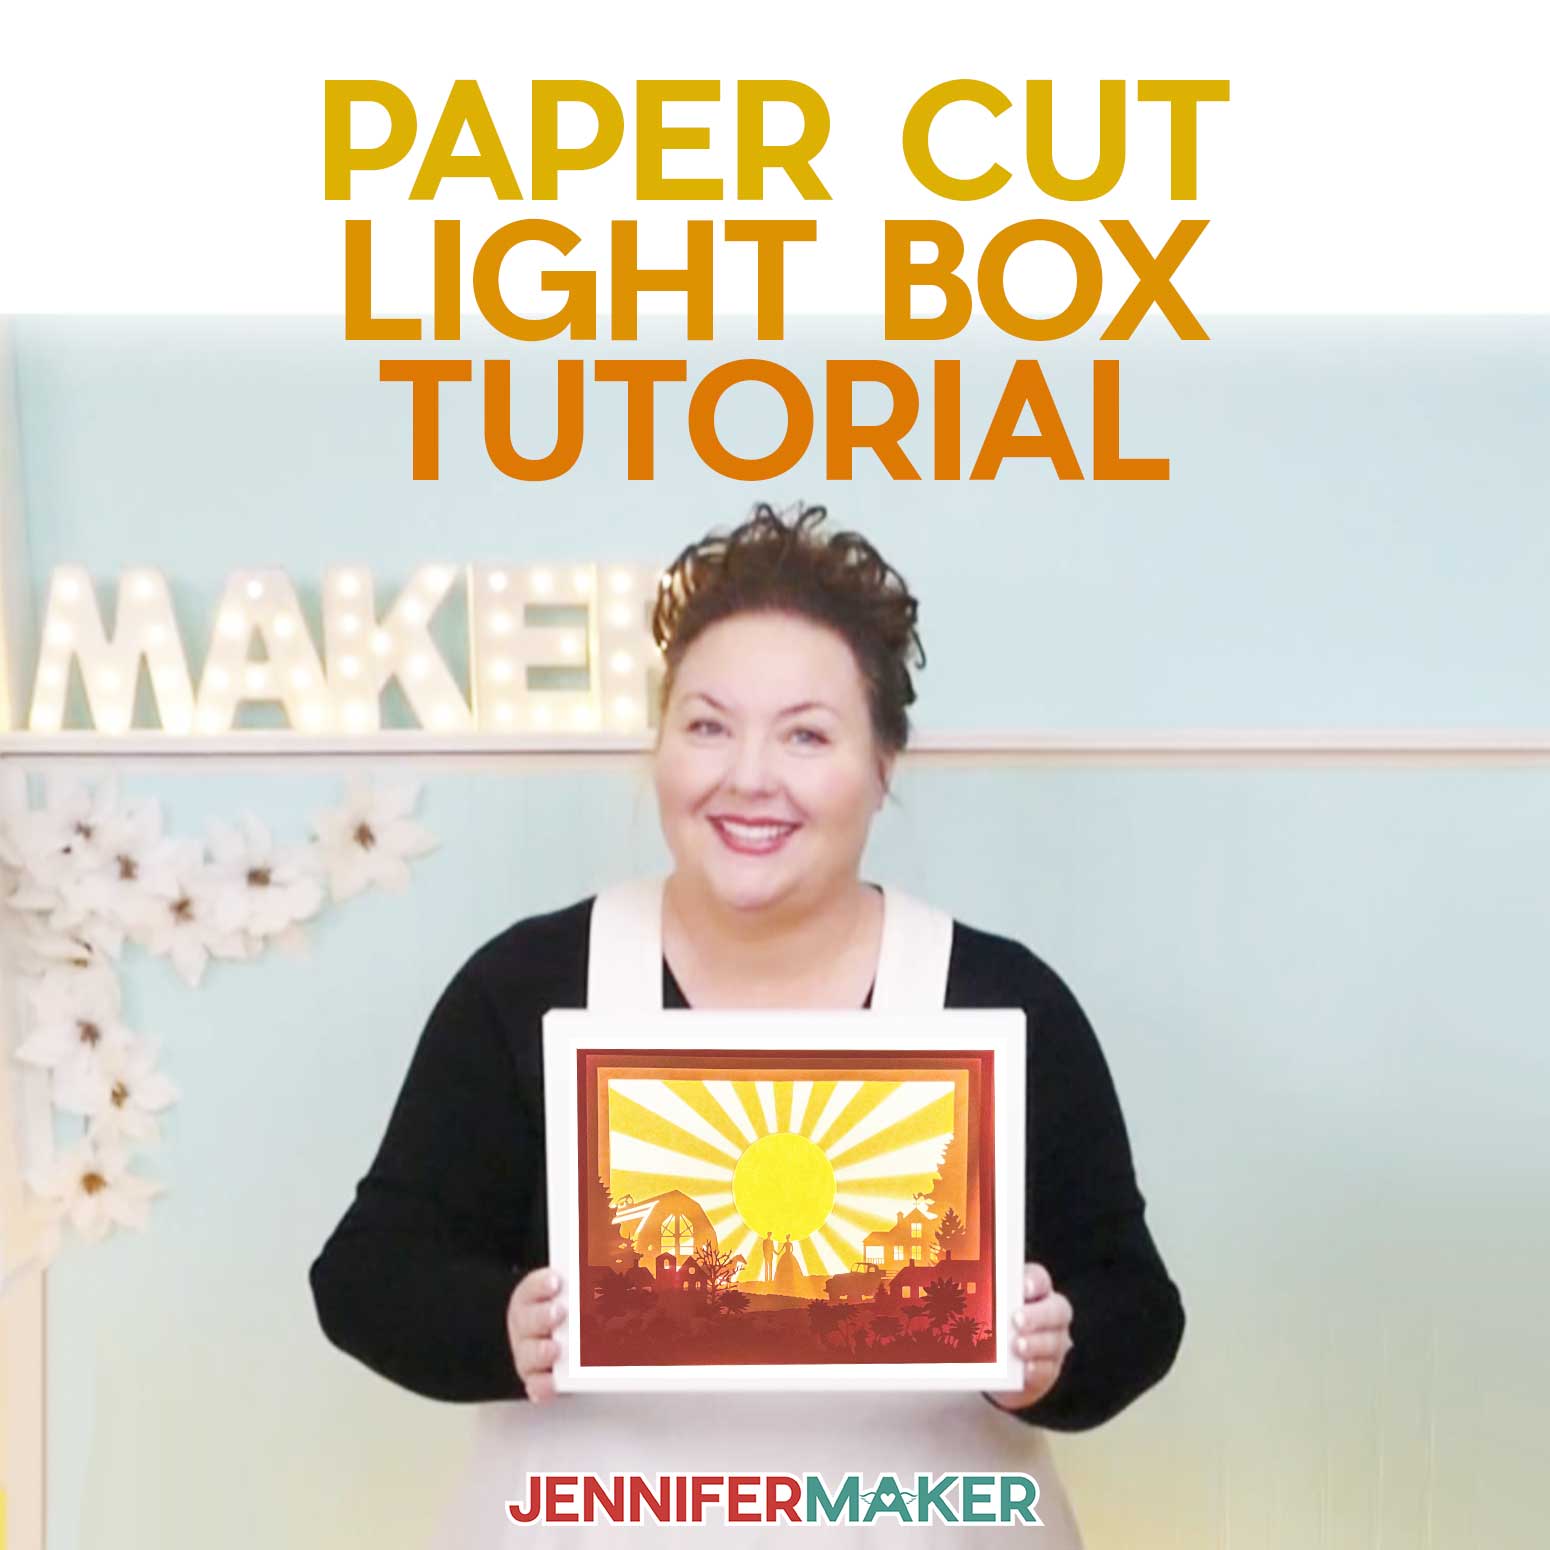 Paper Cut Light Box Tutorial to Make Your Own!